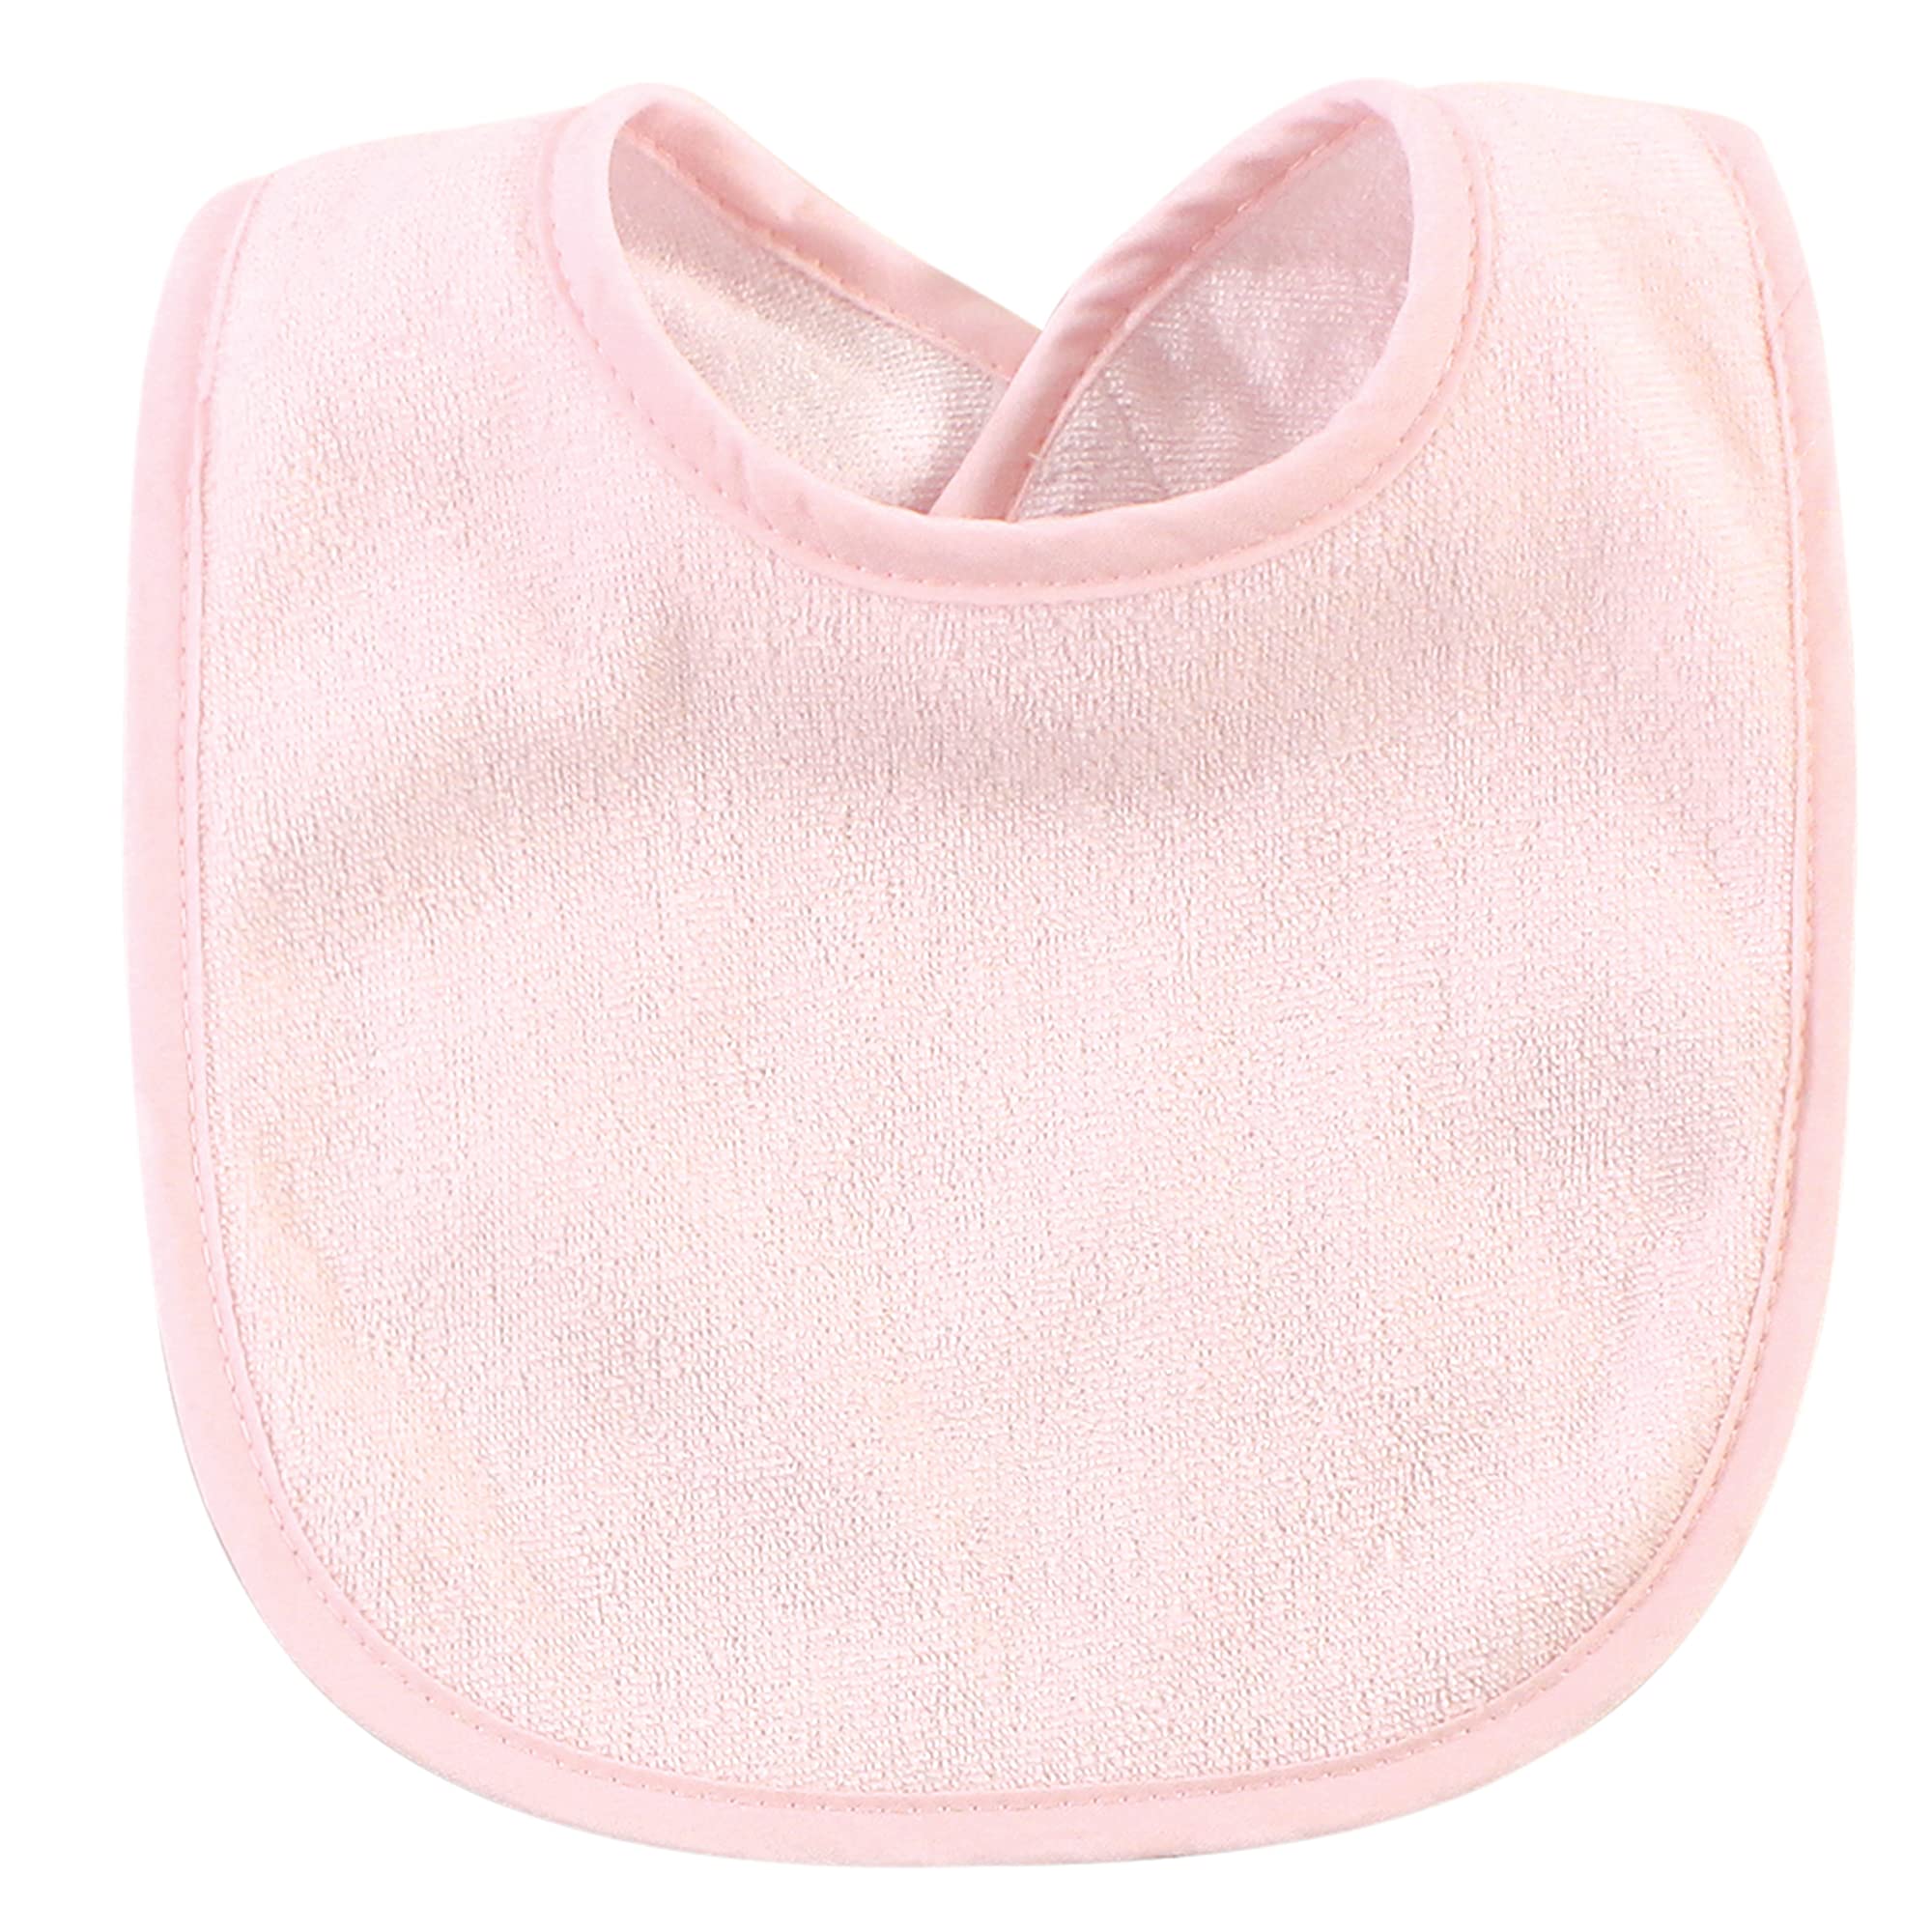 Hudson Baby unisex-baby Cotton and Polyester Bibs